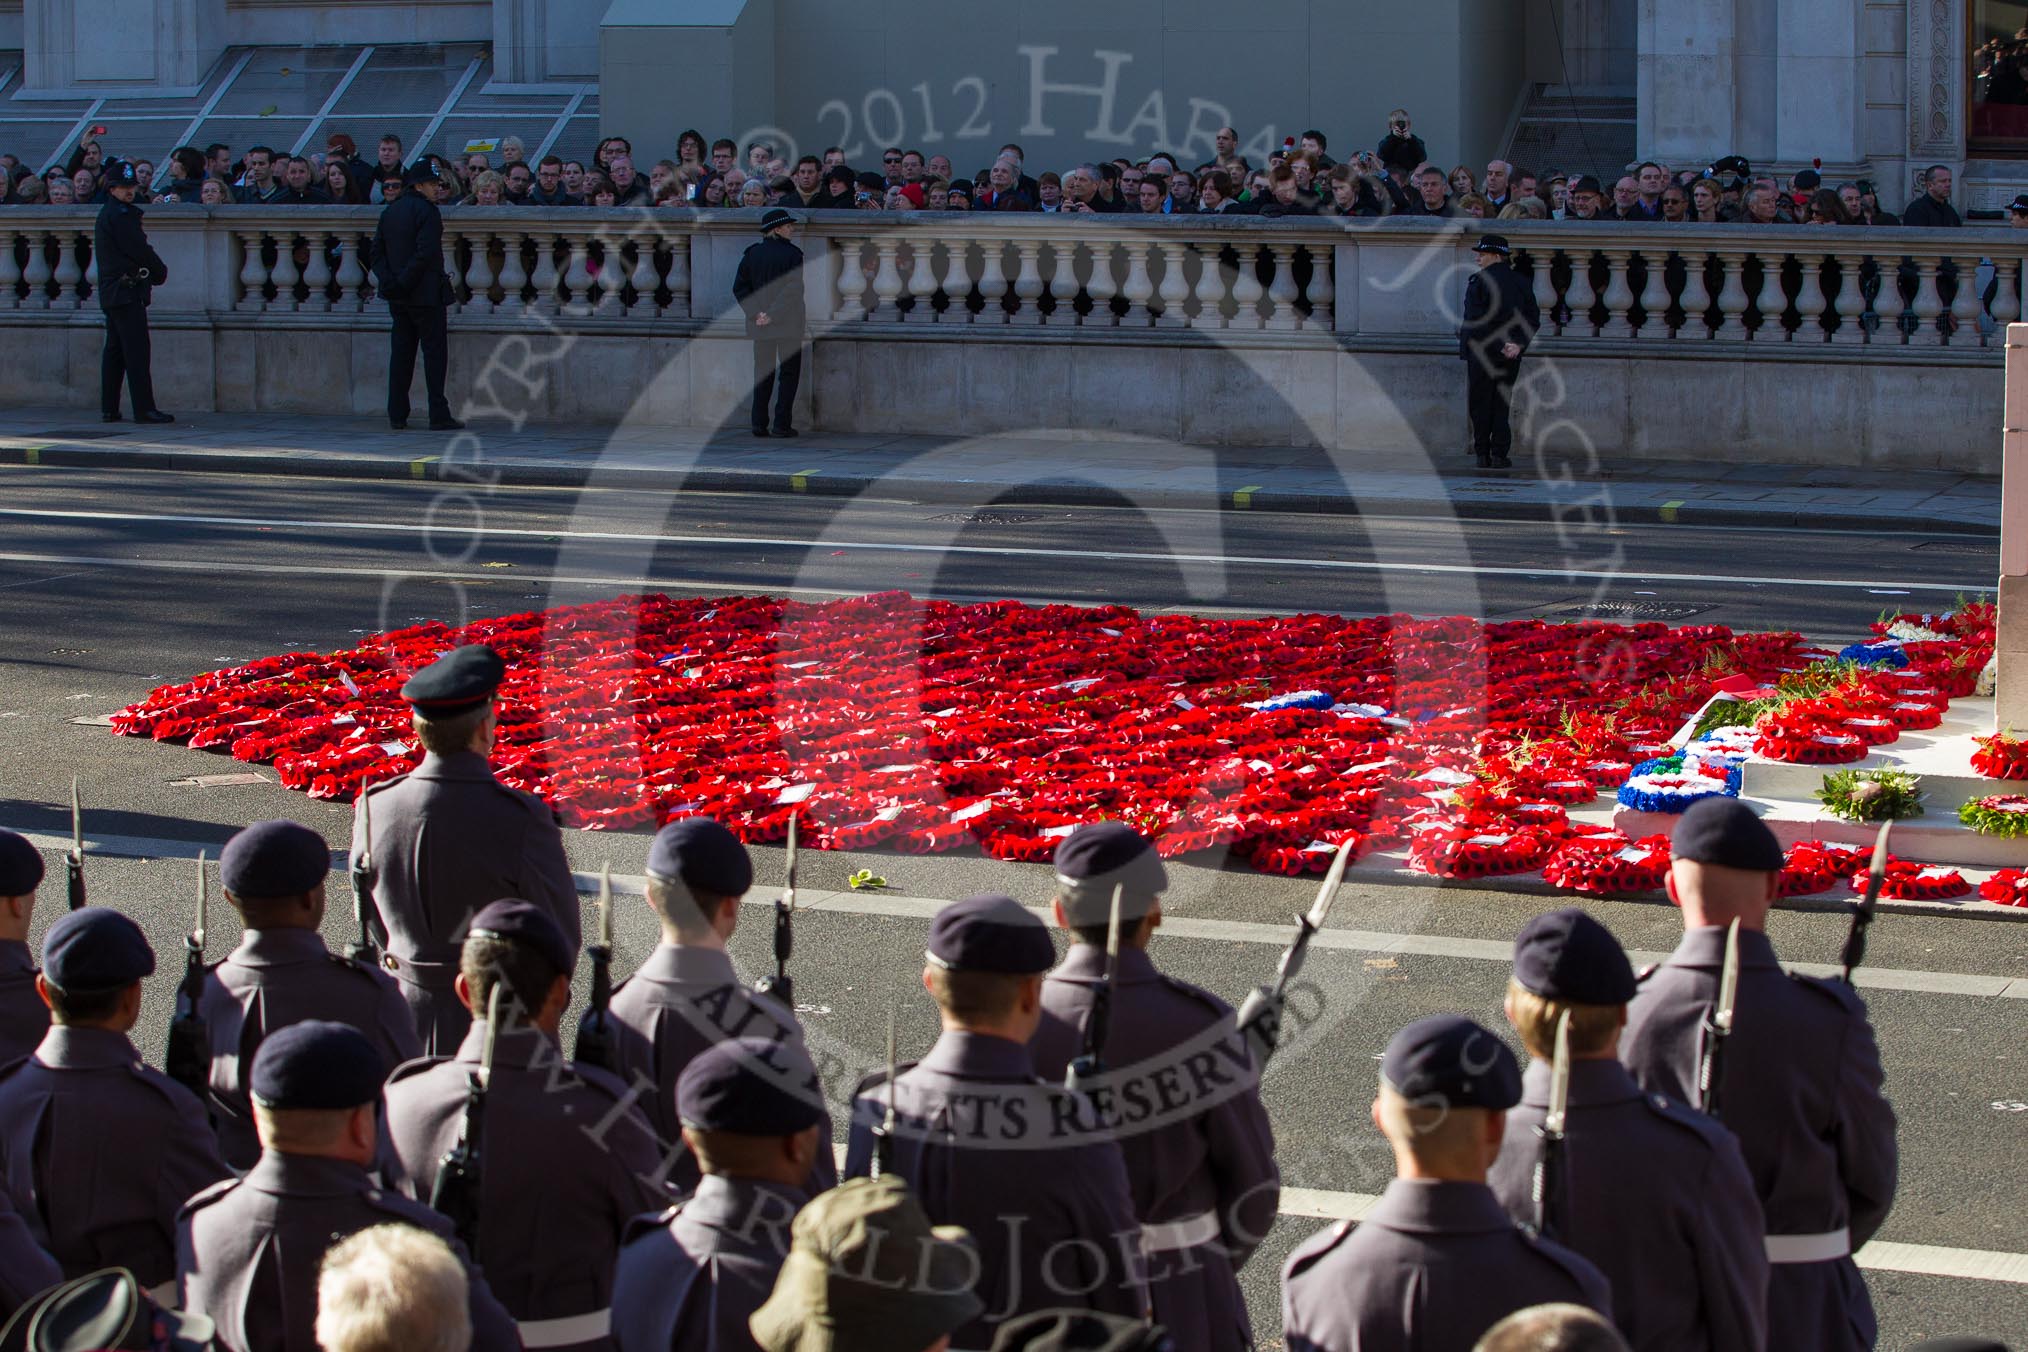 Remembrance Sunday 2012 Cenotaph March Past: Hundreds of wreaths at the Cenotaph after the March Past..
Whitehall, Cenotaph,
London SW1,

United Kingdom,
on 11 November 2012 at 12:25, image #1794